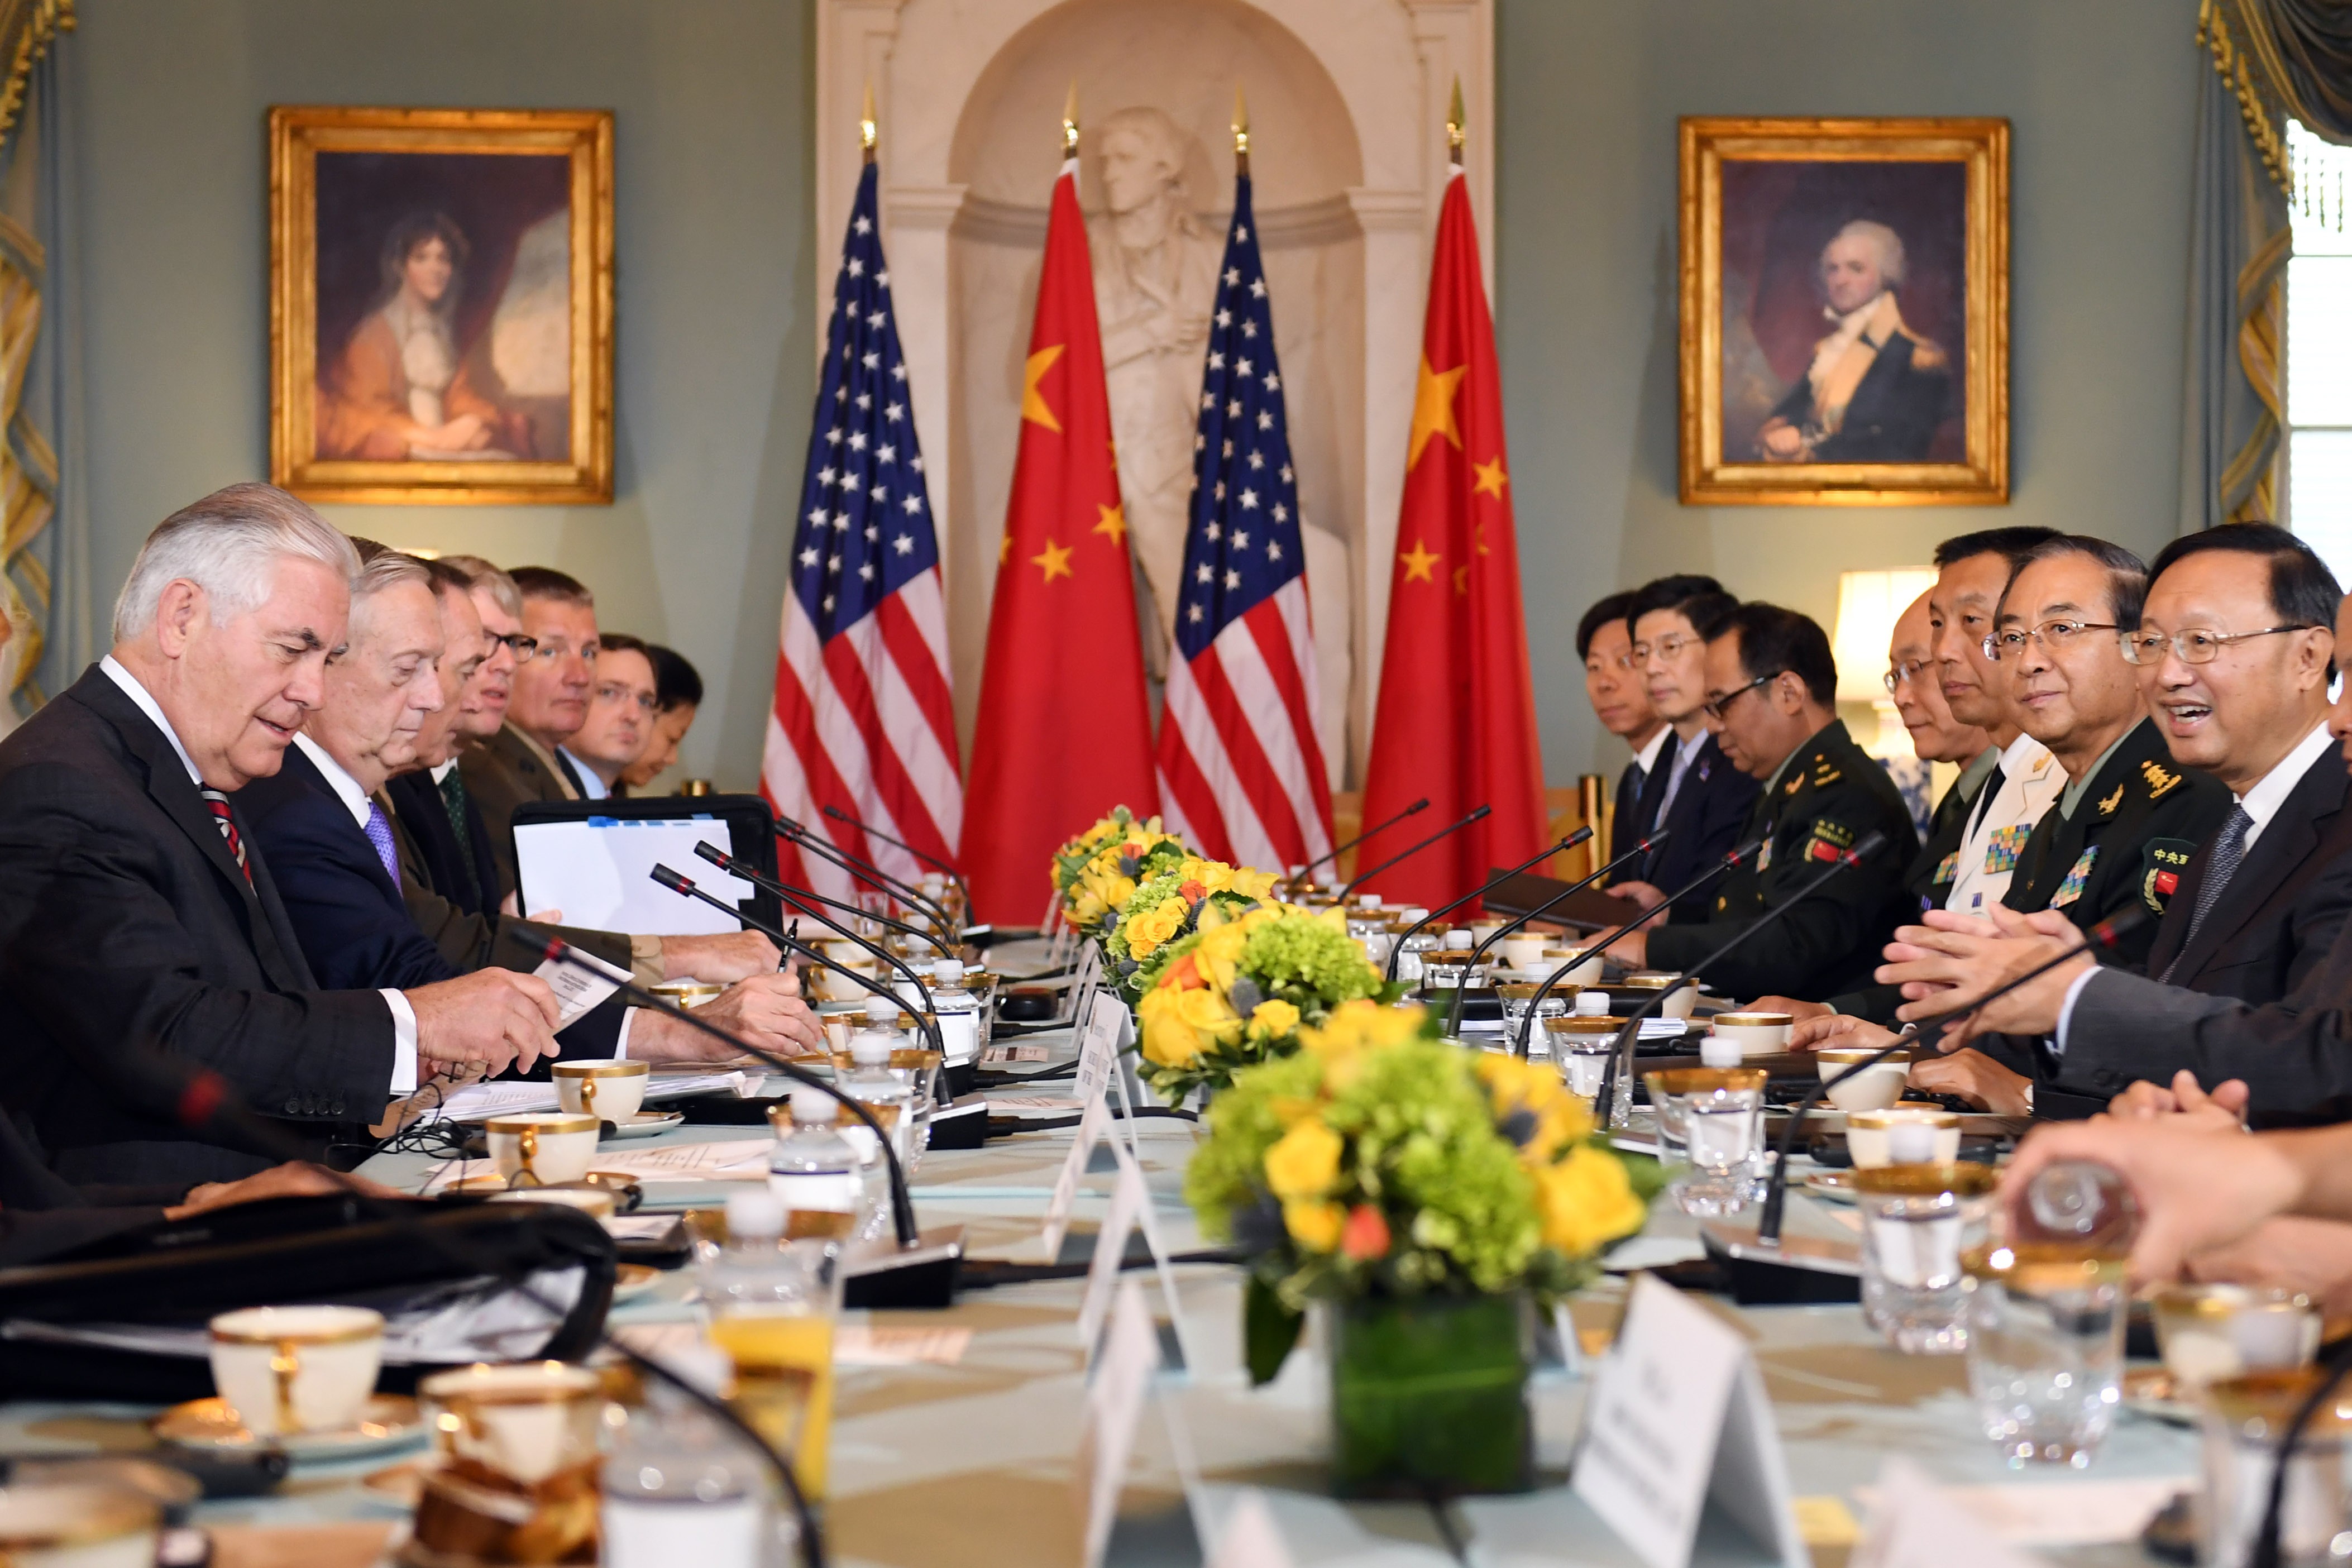 Leading officials from China and the new US Trump administration held their first diplomatic and security dialogue last month, at the US State Department in Washington D.C. Photo: Xinhua